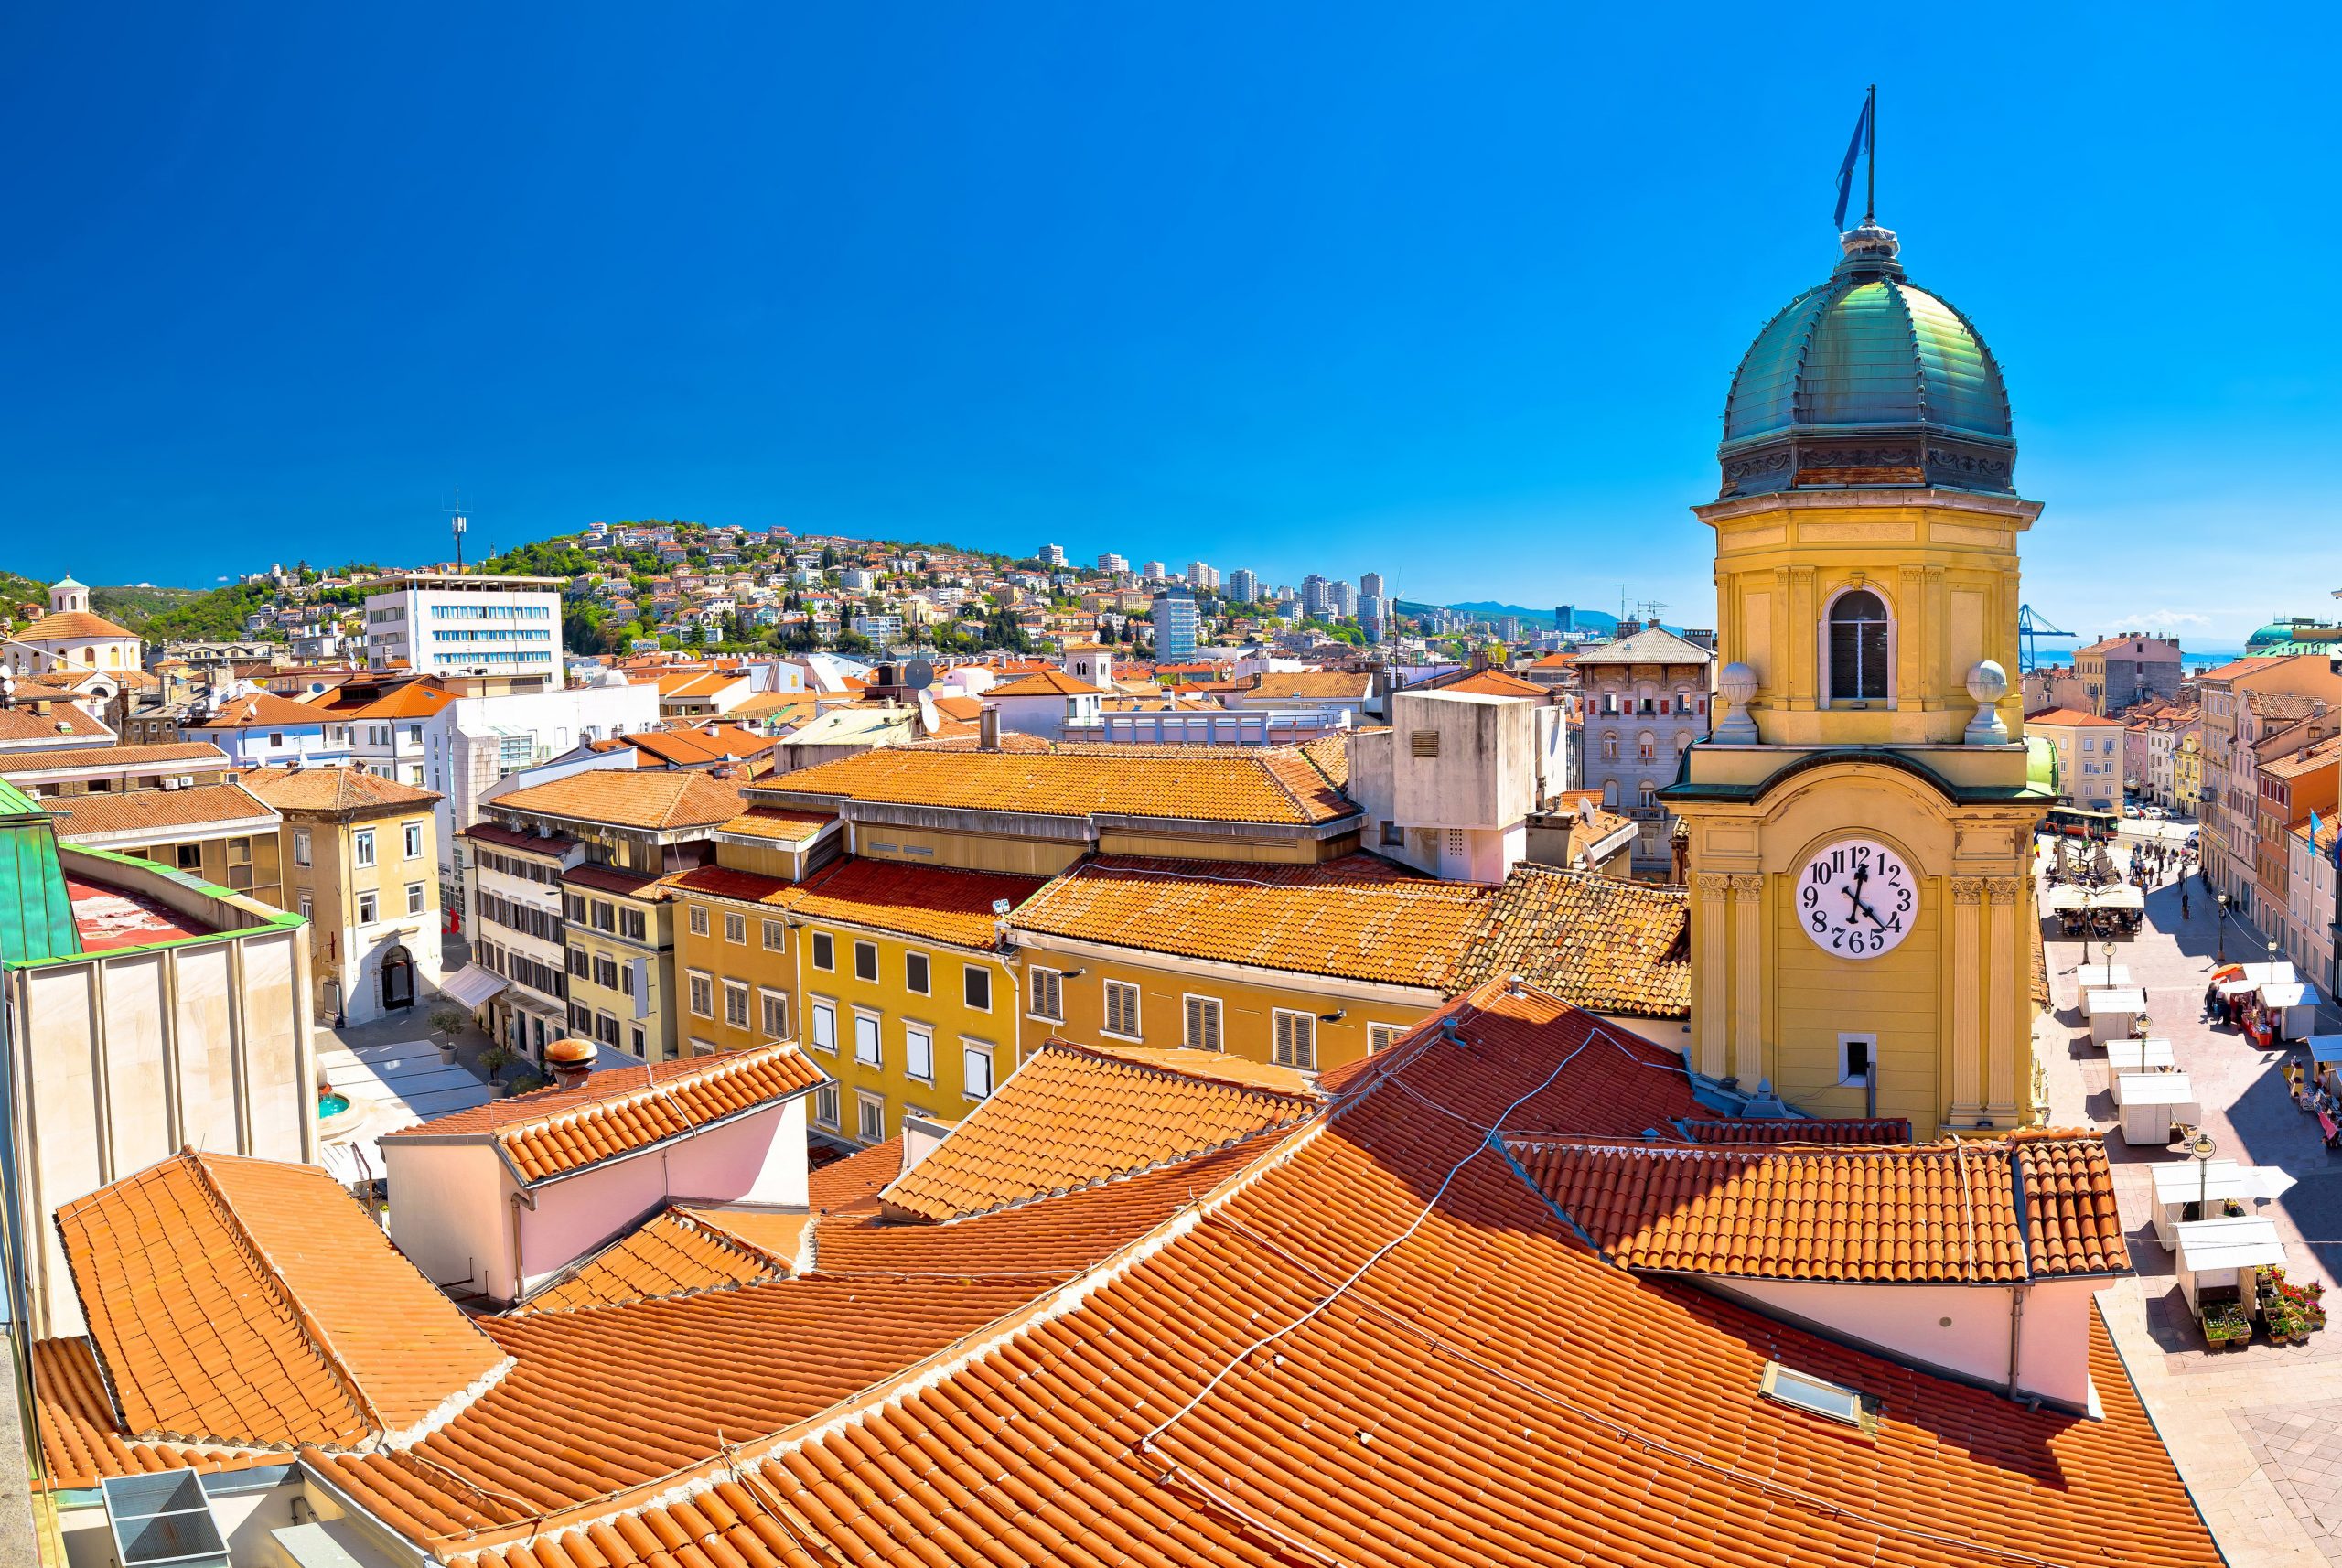 Explore The Market Of Rijeka With Your Guide During Your Istrian Cooking Class